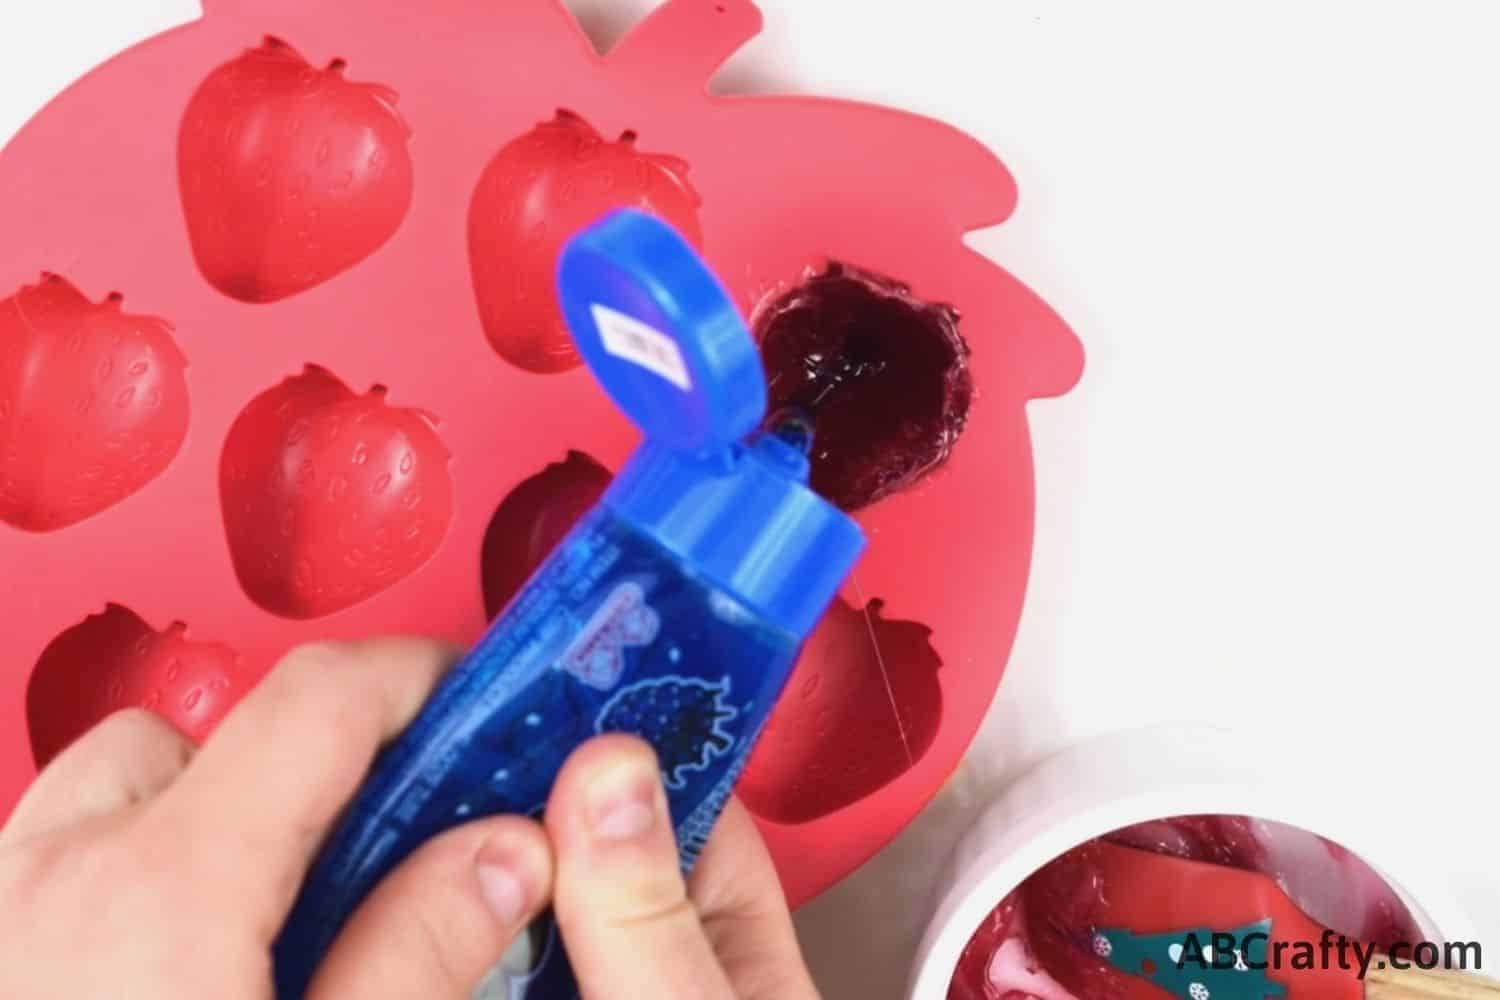 squeezing blue liquid candy into strawberry candy mold with melted gummy fruit candy